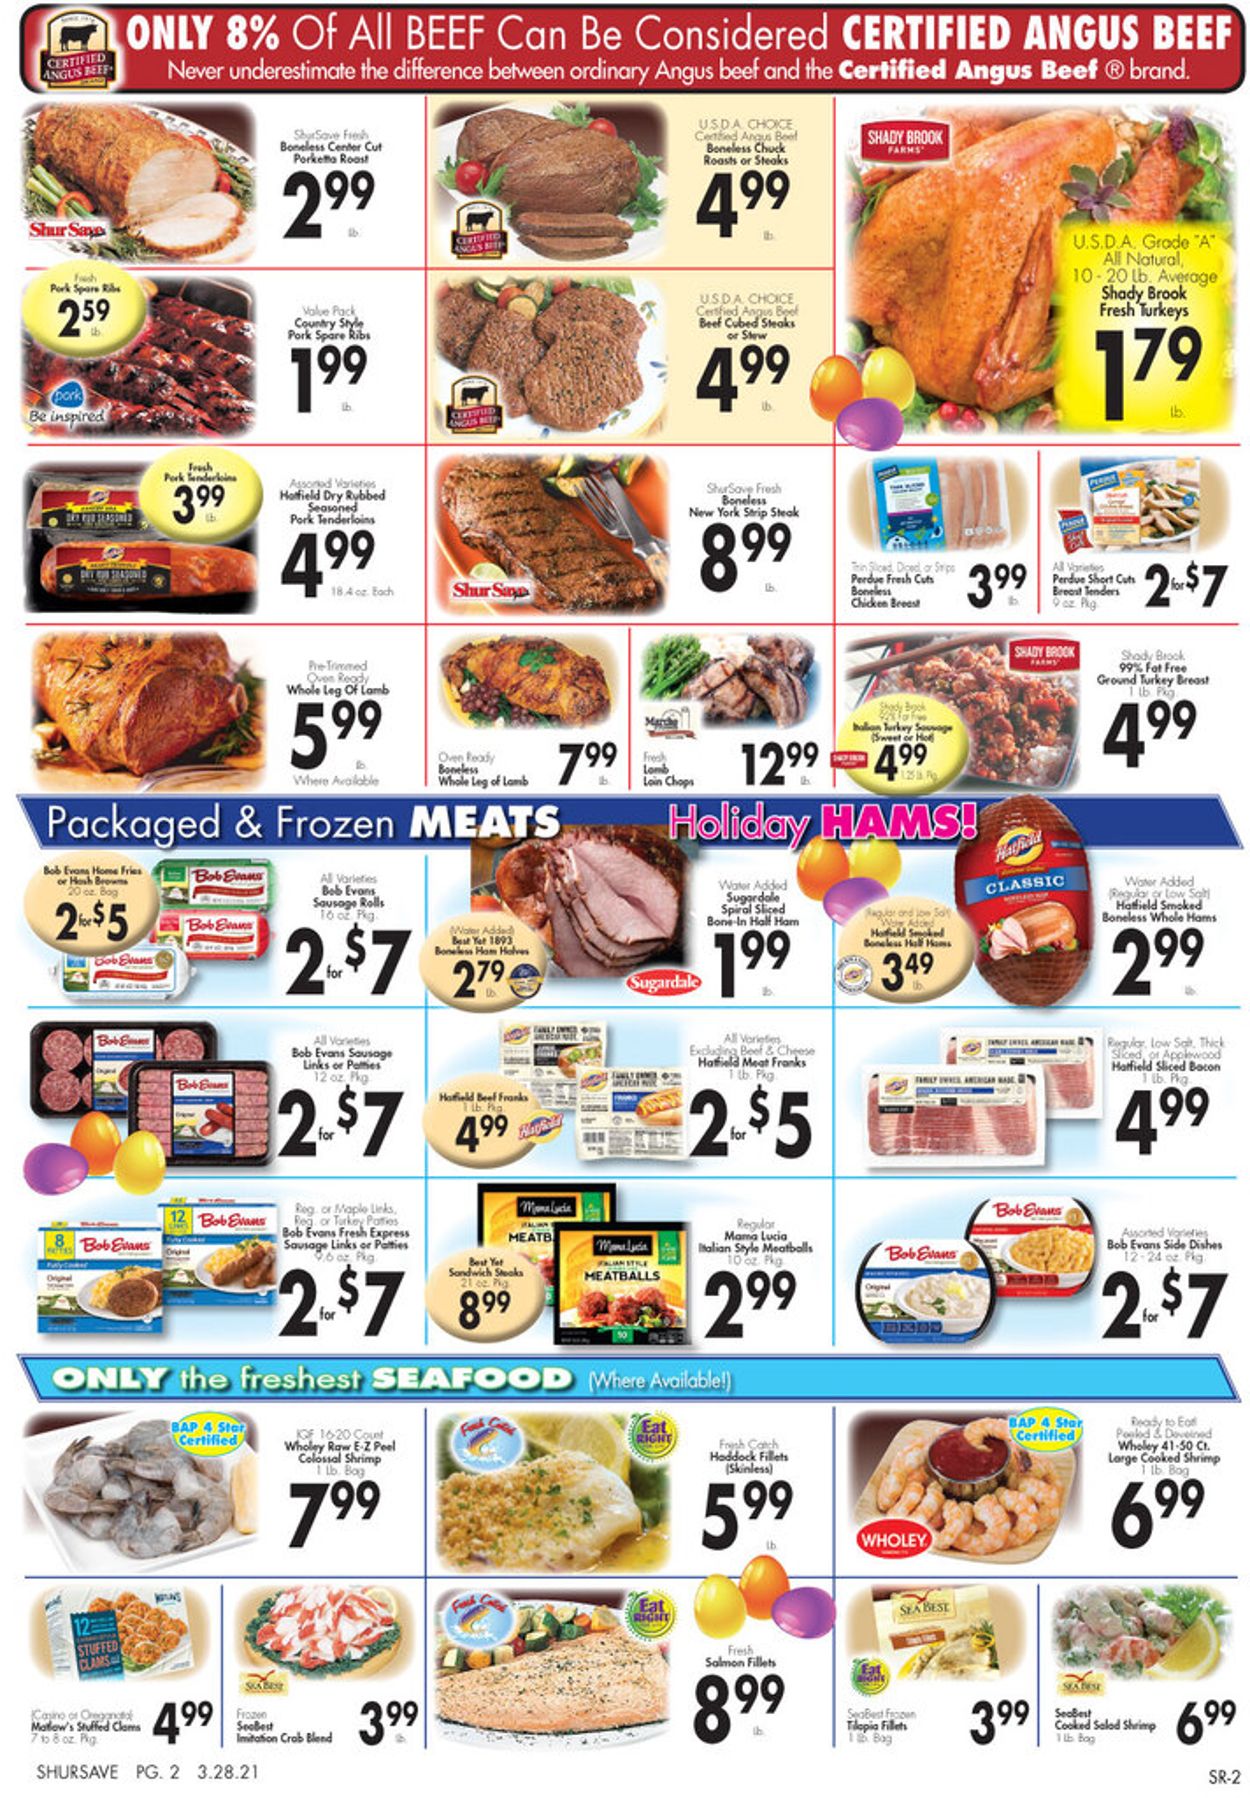 Gerrity's Supermarkets - Easter 2021 ad Weekly Ad Circular - valid 03/28-04/03/2021 (Page 3)